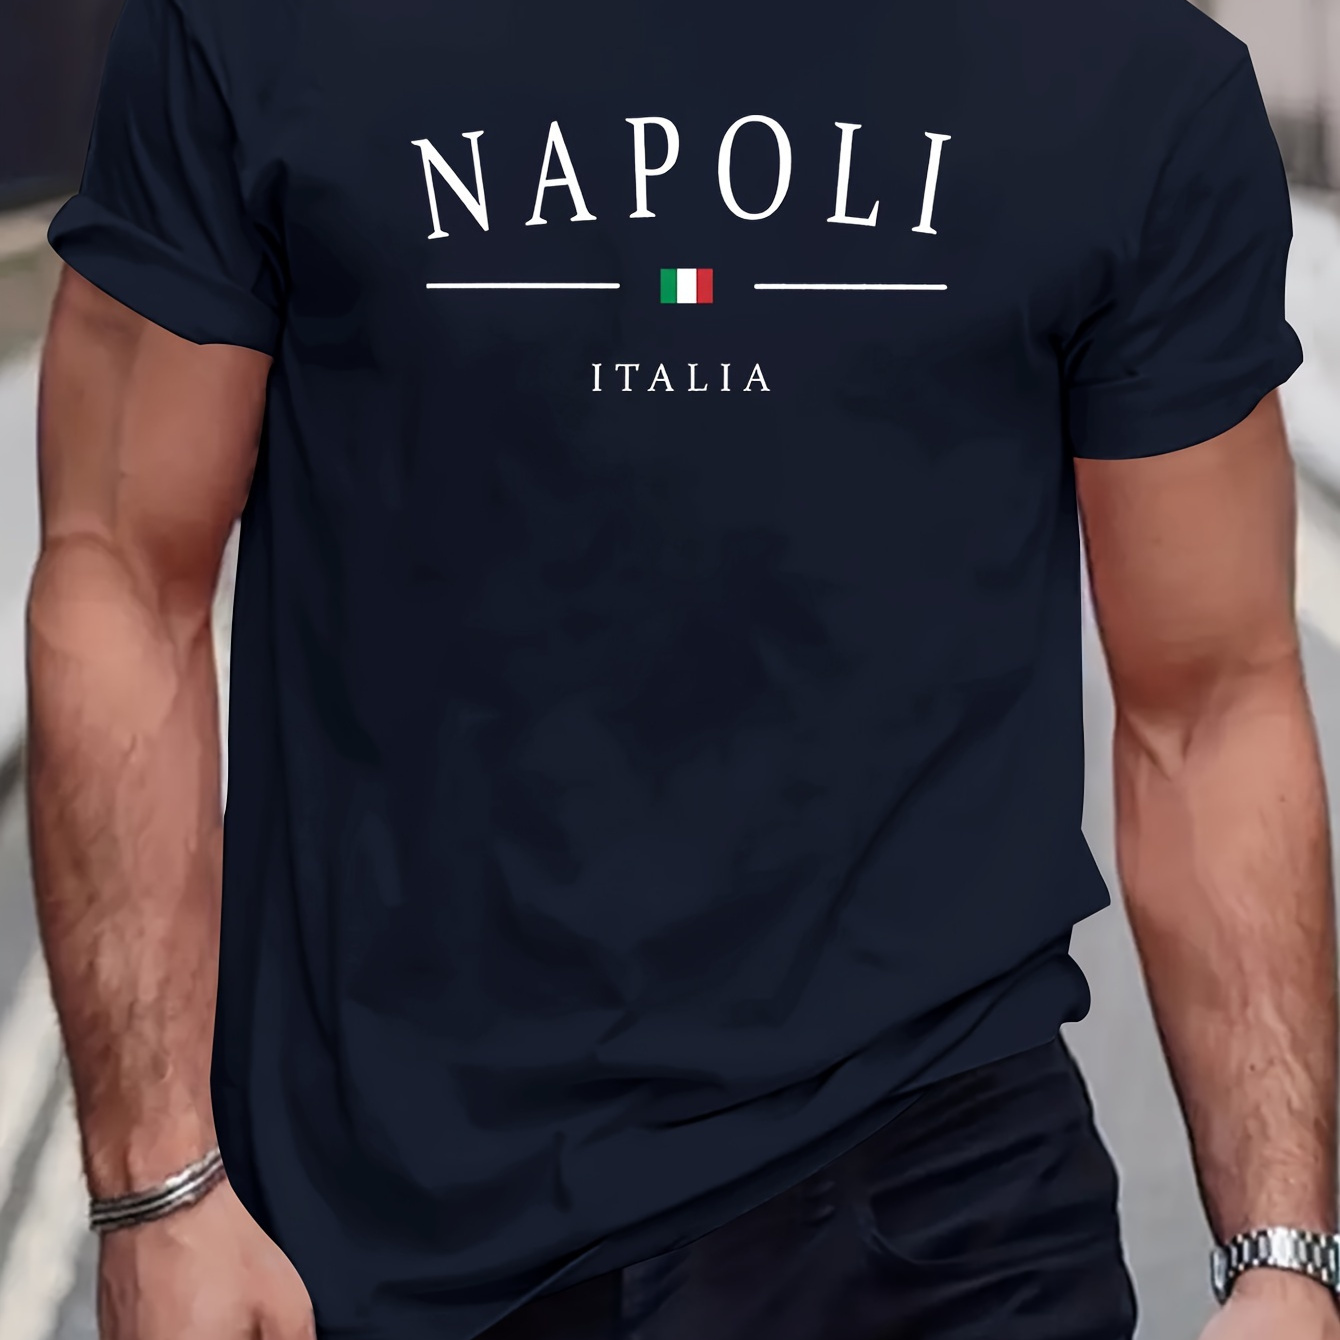 

Italia Napoli Print Casual Short-sleeved T-shirt For Men, Spring And Summer Trendy Top, Comfortable Round Neck Tee, Regular Fit, Versatile Fashion For Everyday Wear